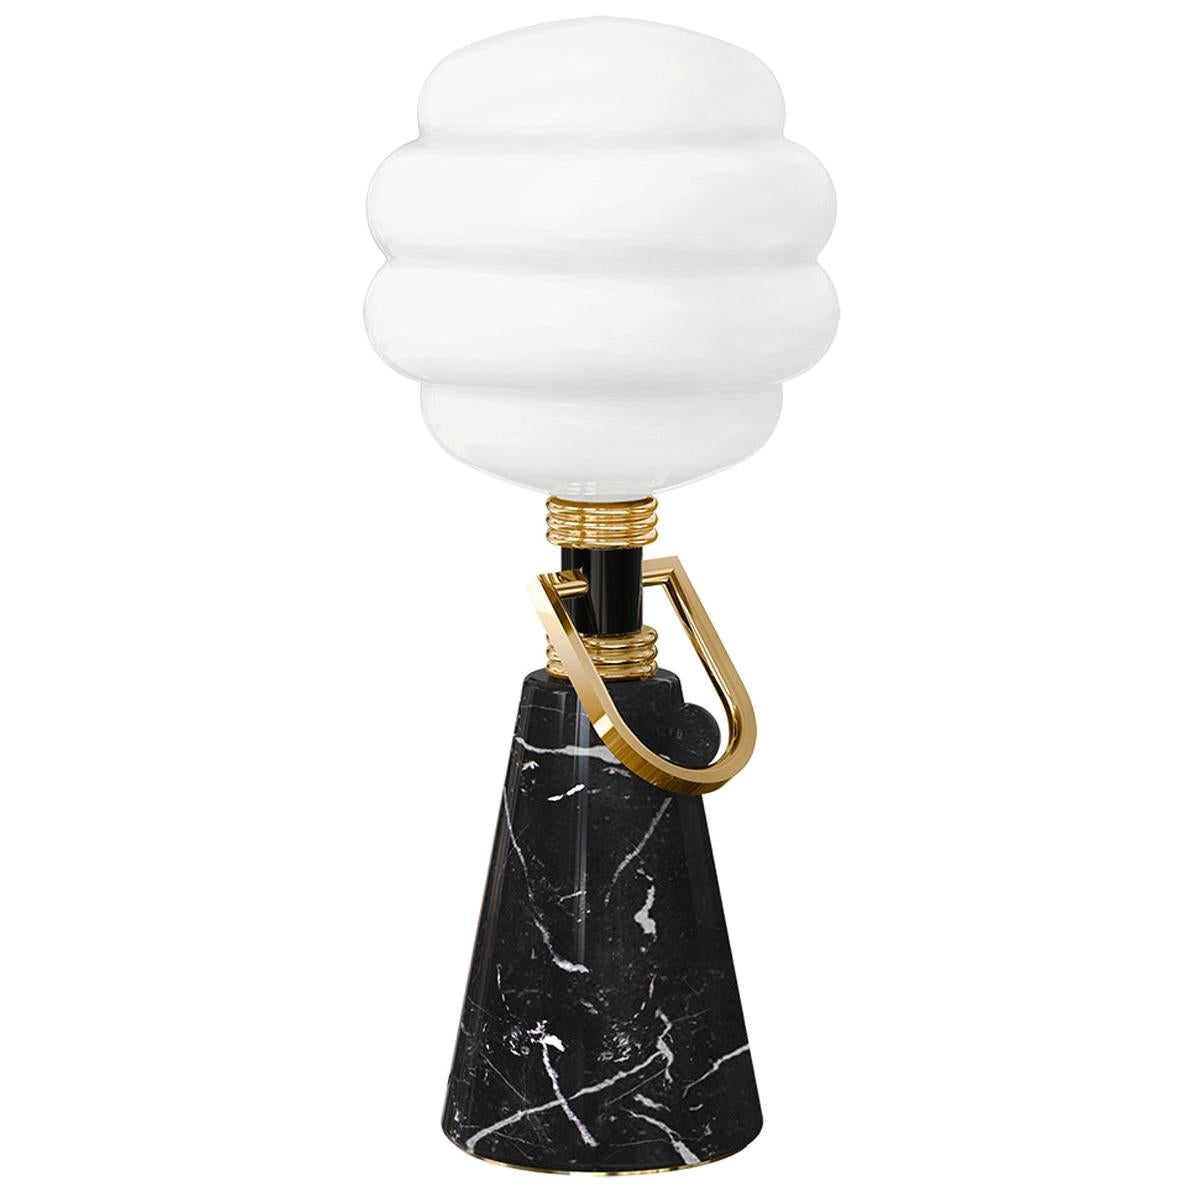 Art Deco Style Table Lamp in Negro Marquina Black Marble & Gold Polished Brass